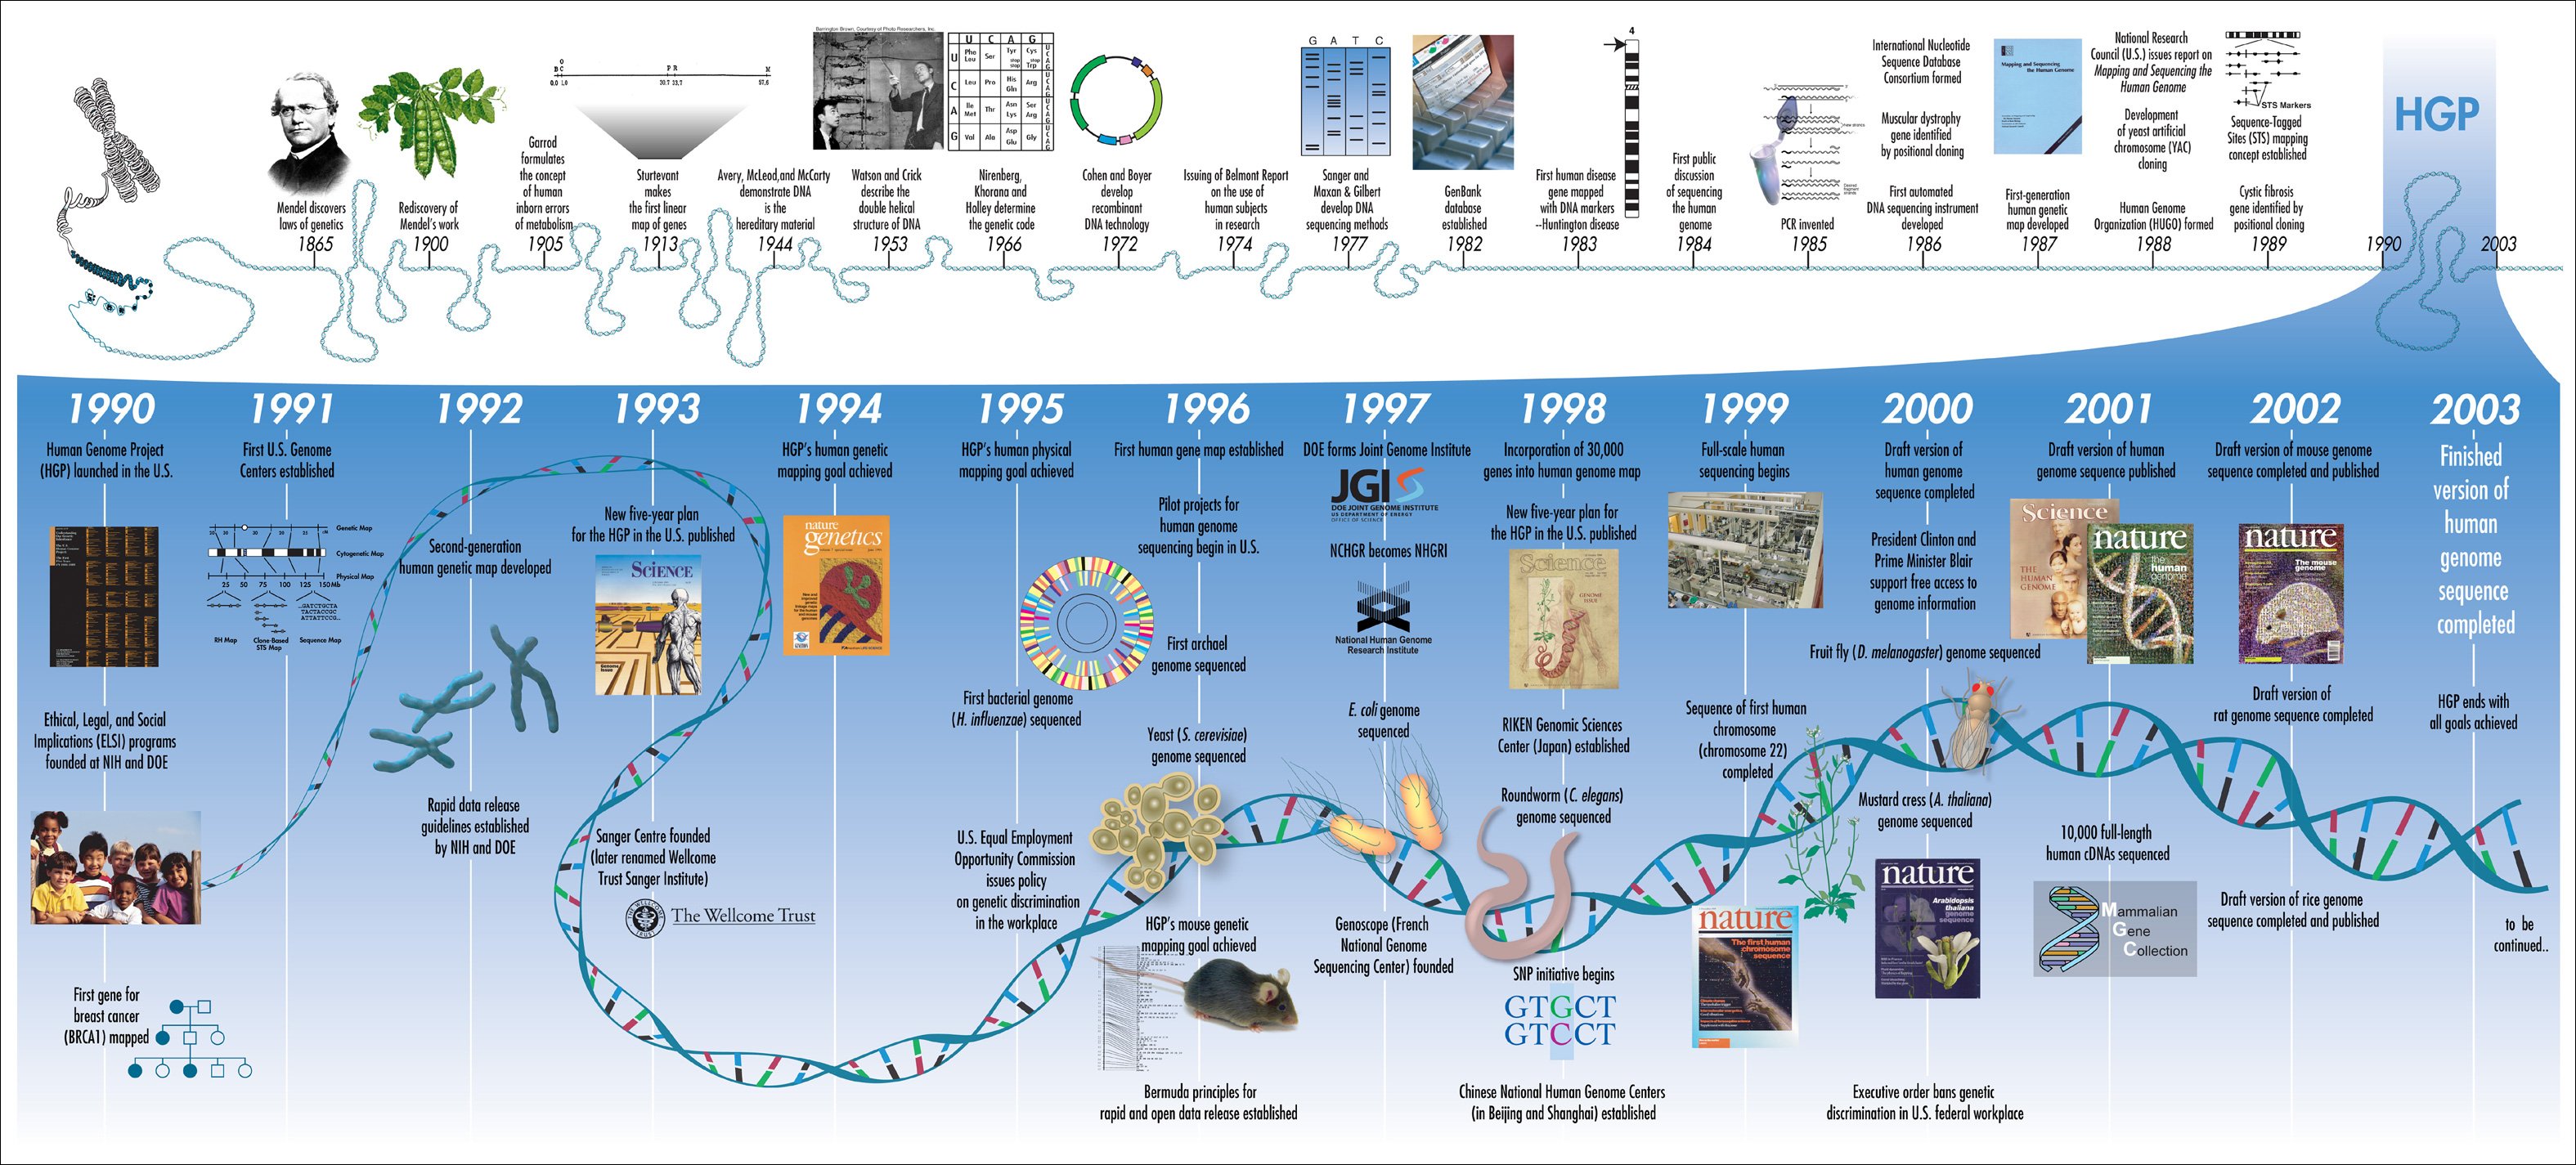 Human_Genome_Project_Timeline_(26964377742)